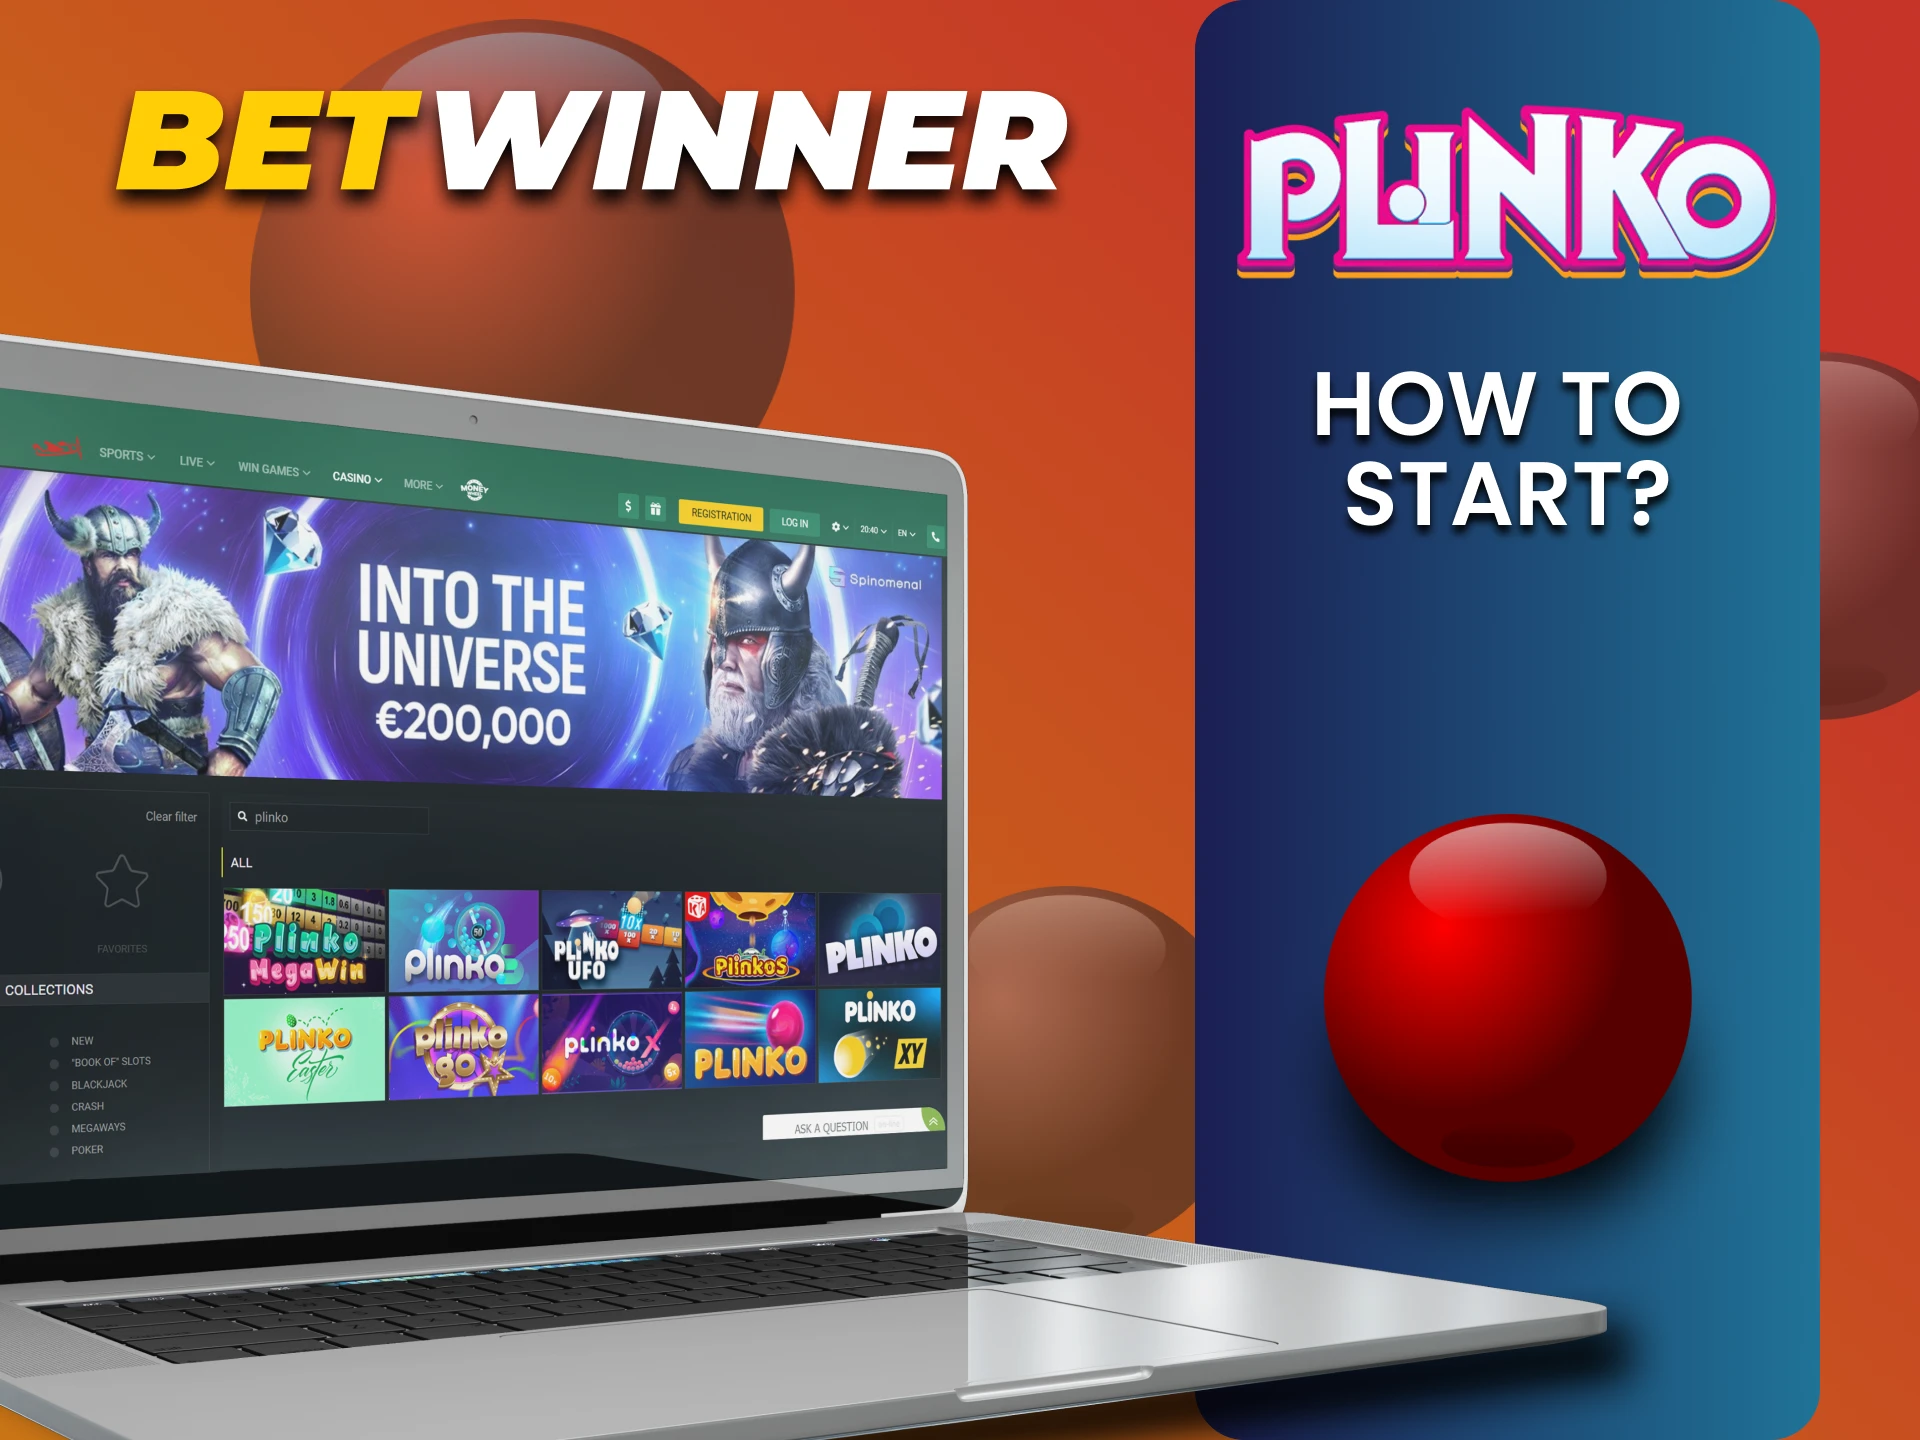 Go to the casino section at Betwinner to play Plinko.